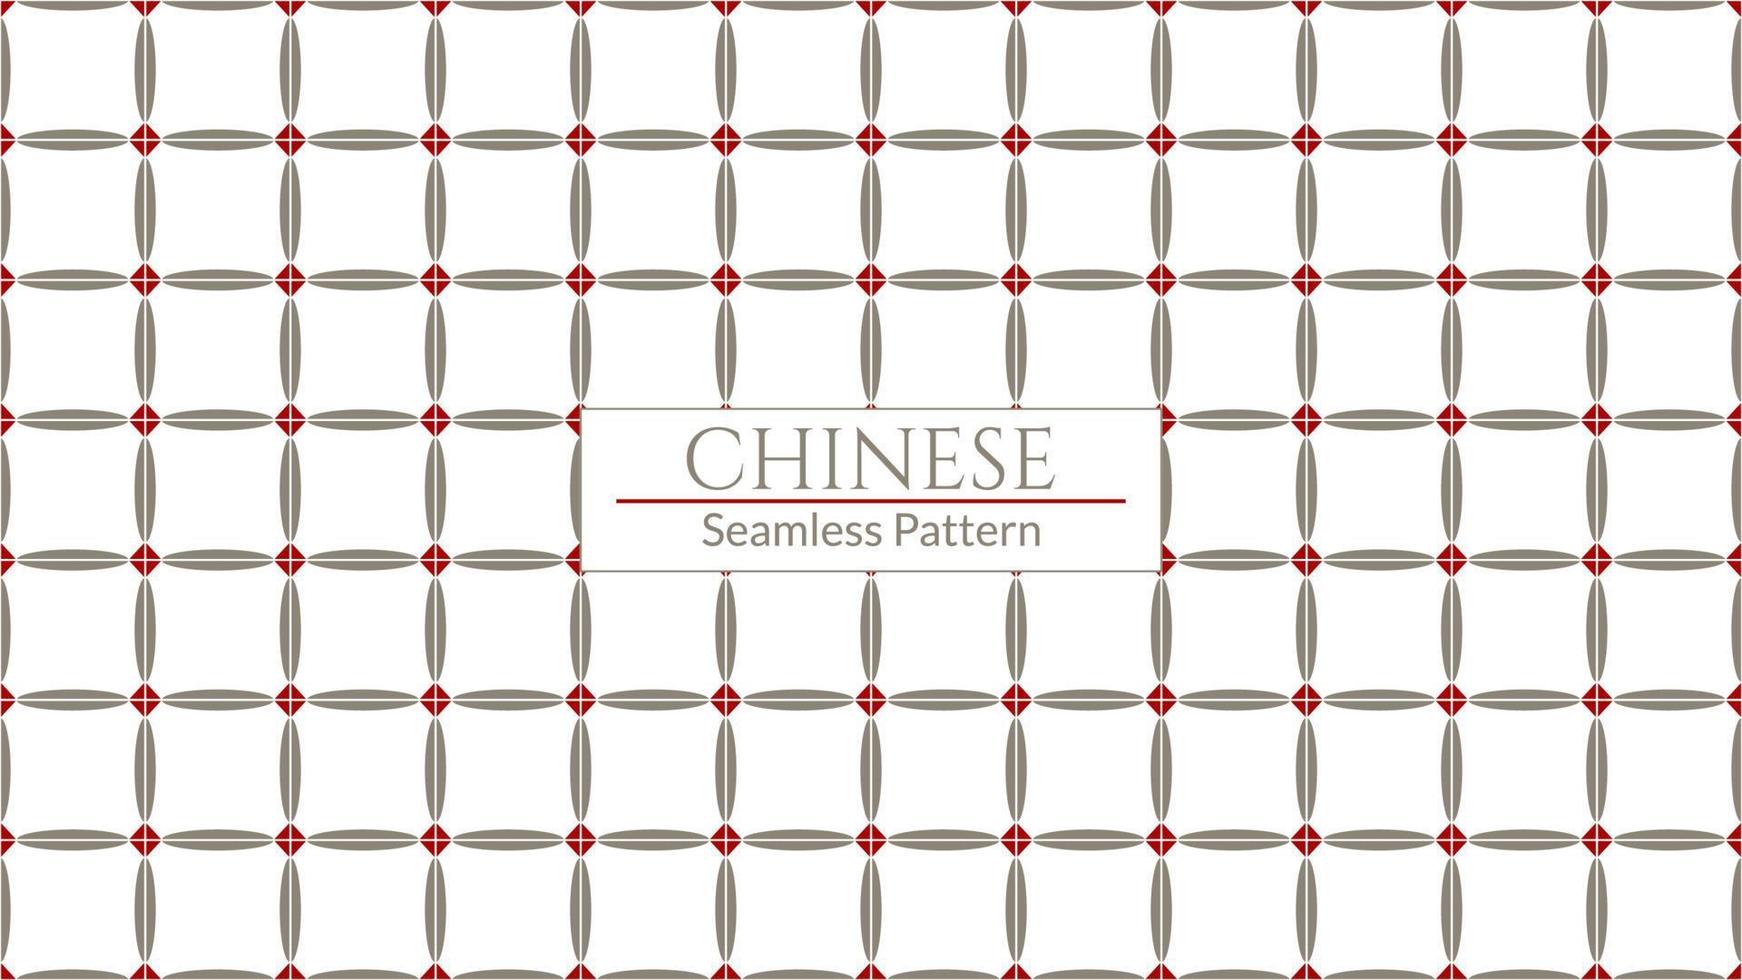 Hong Kong nostalgic style pattern. Vector seamless Hong Kong traditional vintage pattern style floor textured background.